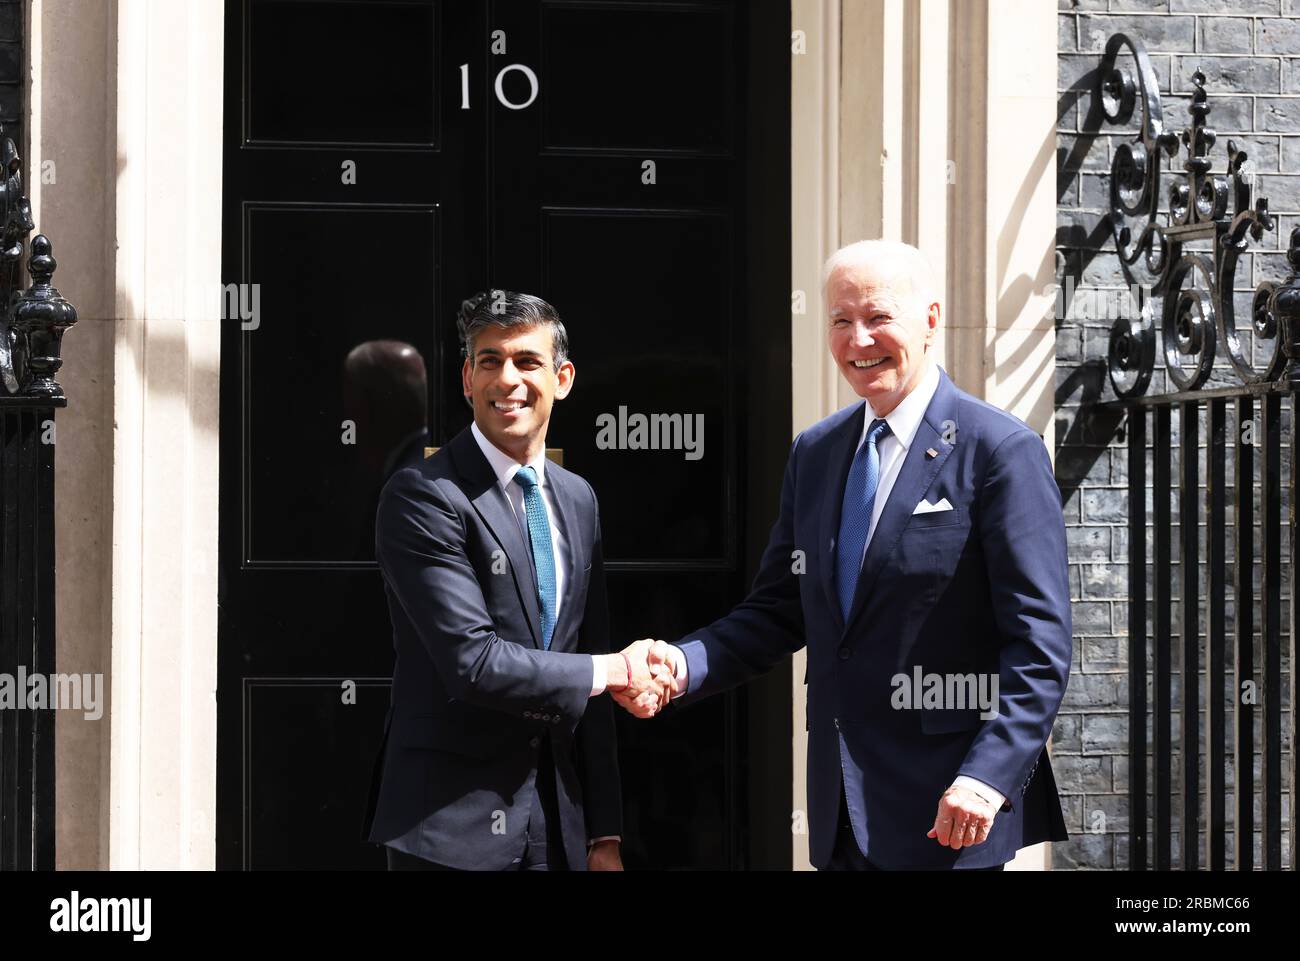 London, UK, 10th July 2023. British PM and American President Joe Biden greeted each other warmly at Downing Street this morning, despite the public disagreement within the alliance over the US's recent decision to send cluster bombs to help Ukraine. Biden was next heading off to meet King Charles at Windsor. Credit : Monica Wells/Alamy Live News Stock Photo